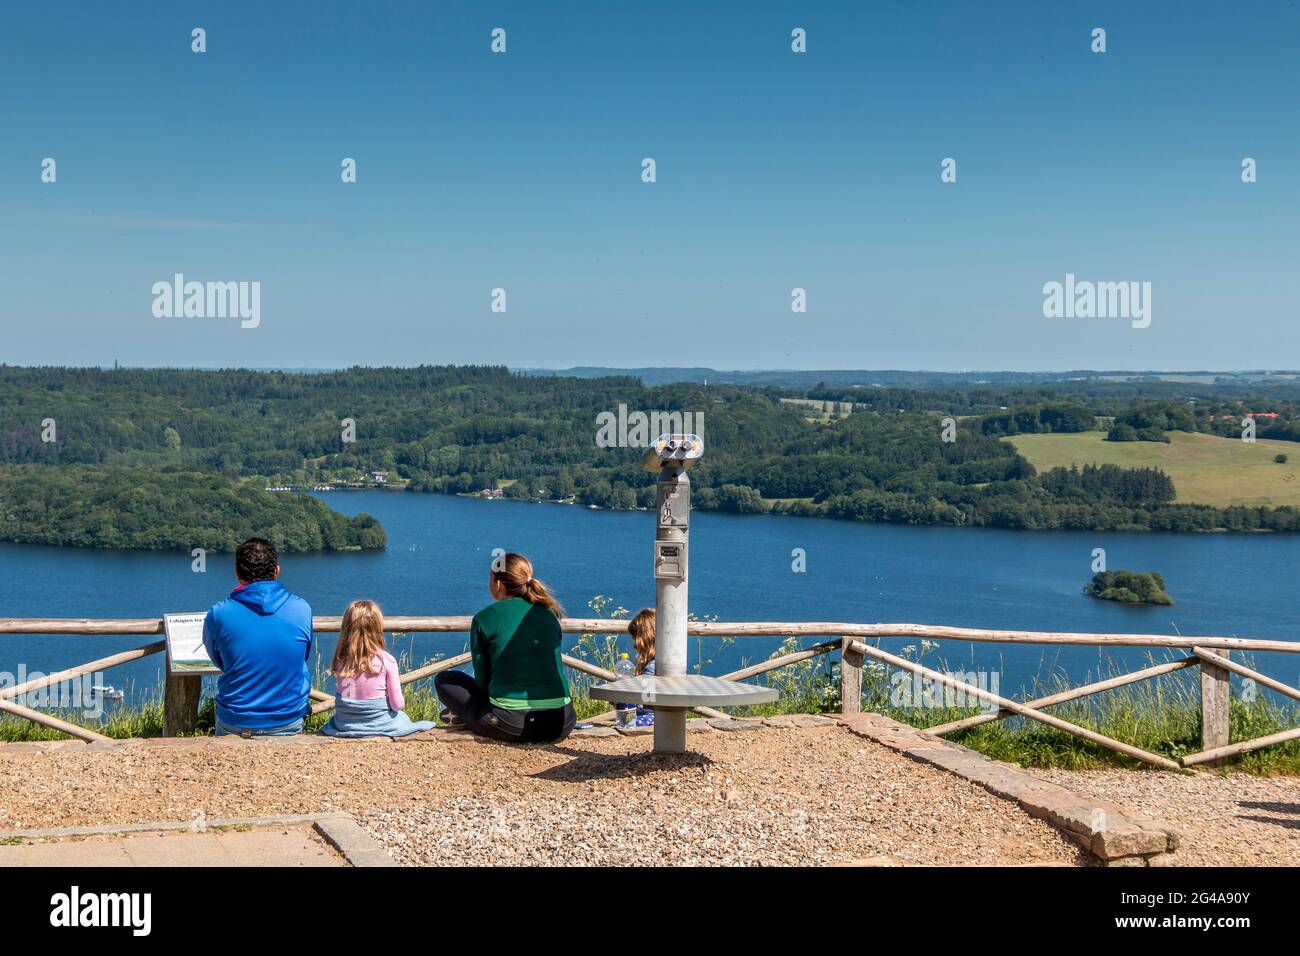 Page 2 - European Family Sits High Resolution Stock Photography and Images  - Alamy